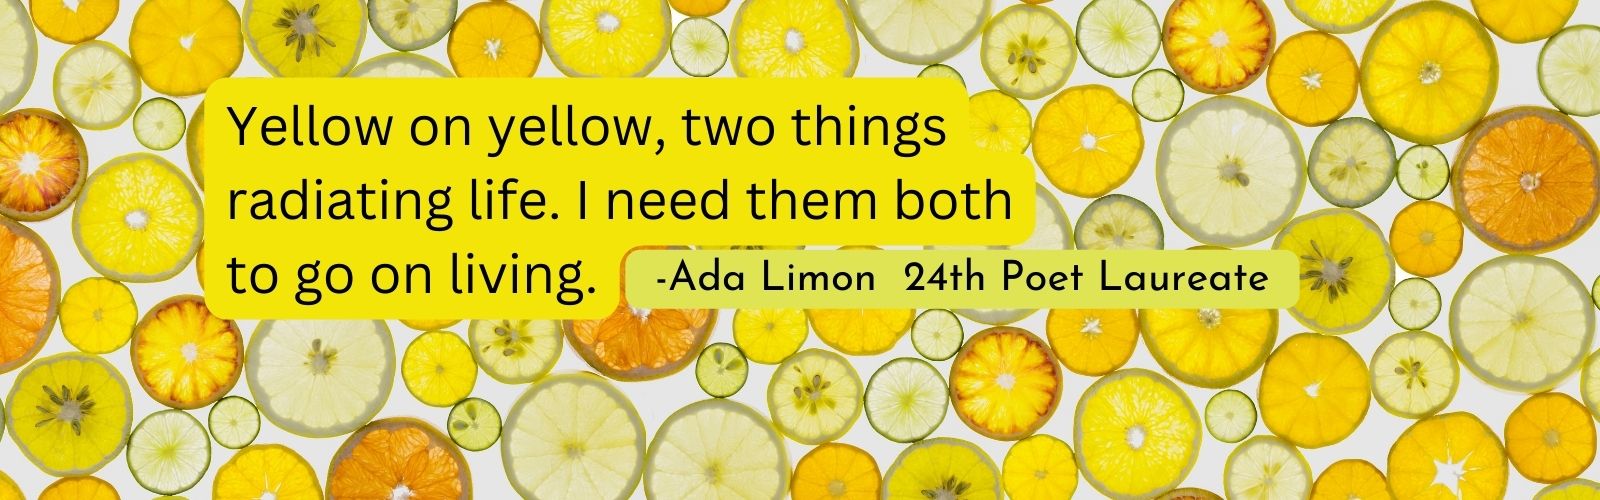 lemon slices background with a peom by Ada Limon